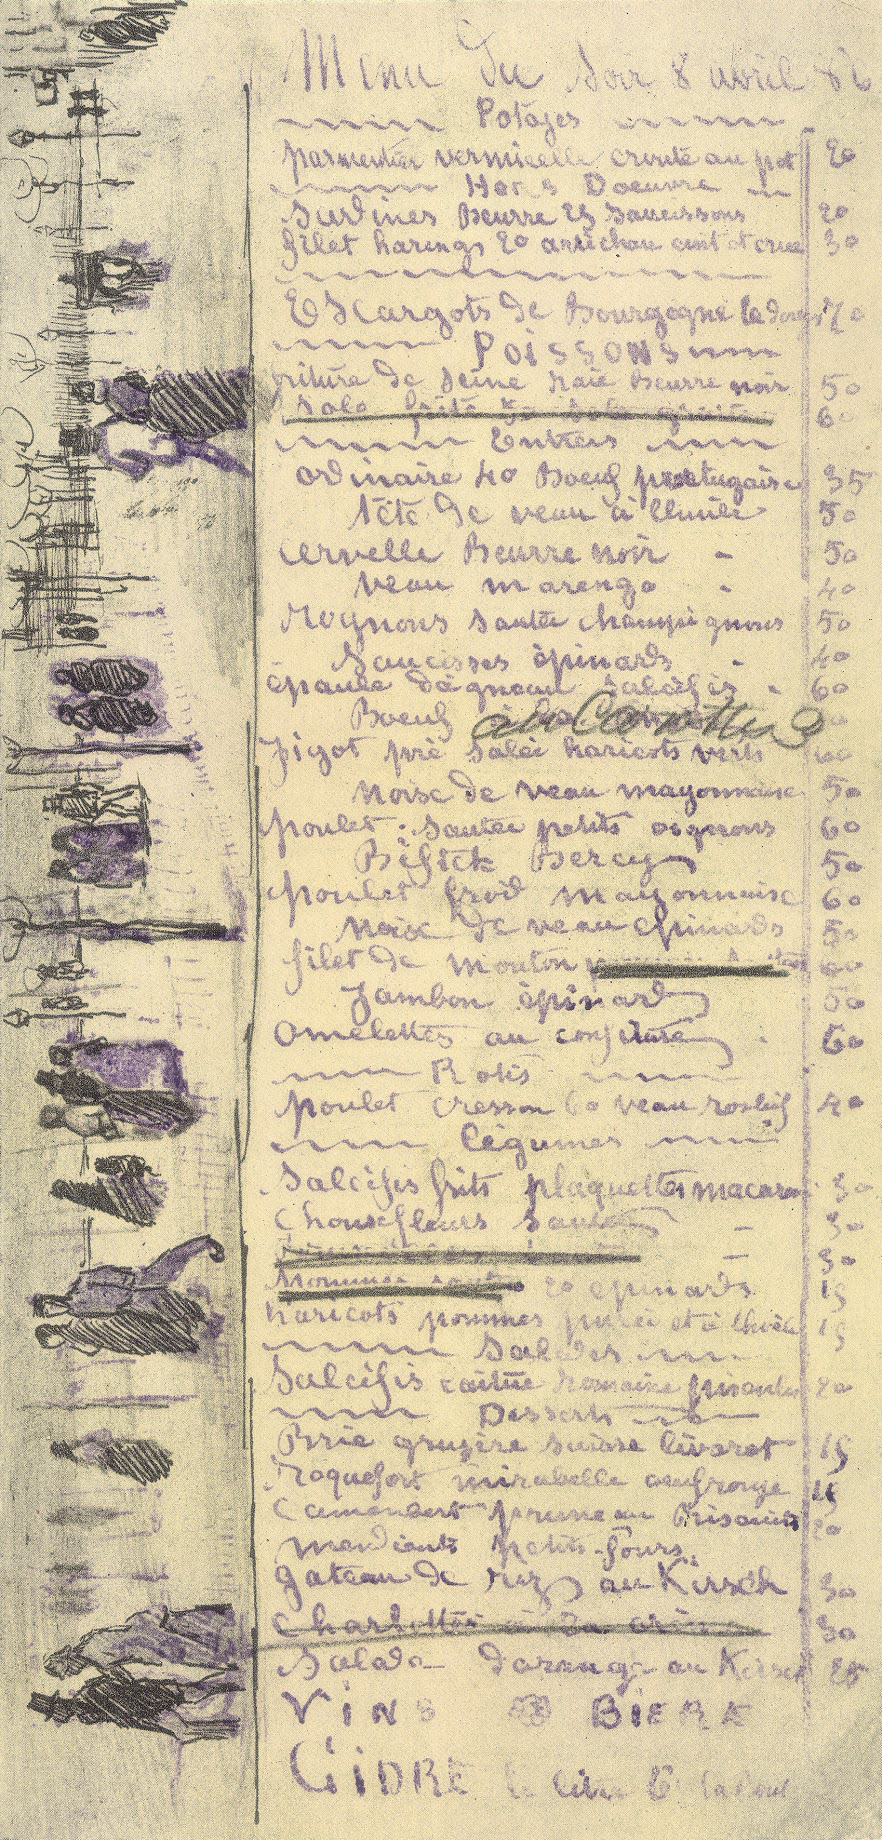 A photograph of a page from book or journal. The wording is done with a purple color from a pencil. While A drawing of people walking is on its side against the writing.